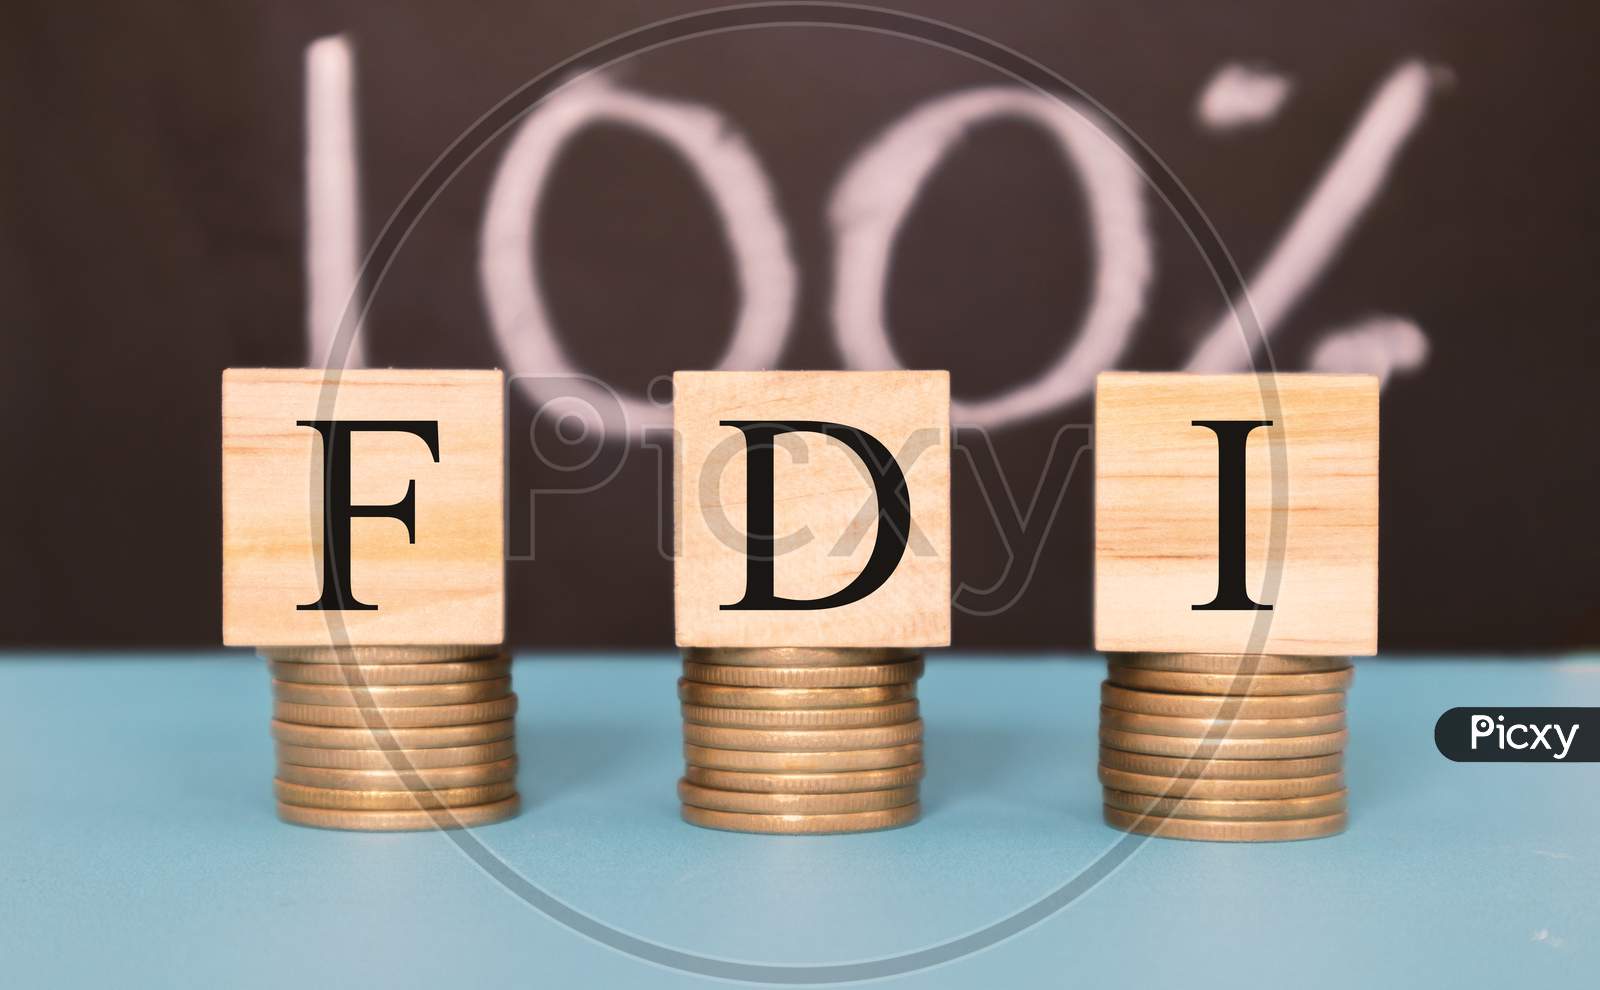 Finance Concept With Stack Of Coins - 100 Percent Fdi Or Foreign Direct Investment On Wooden Blocks.